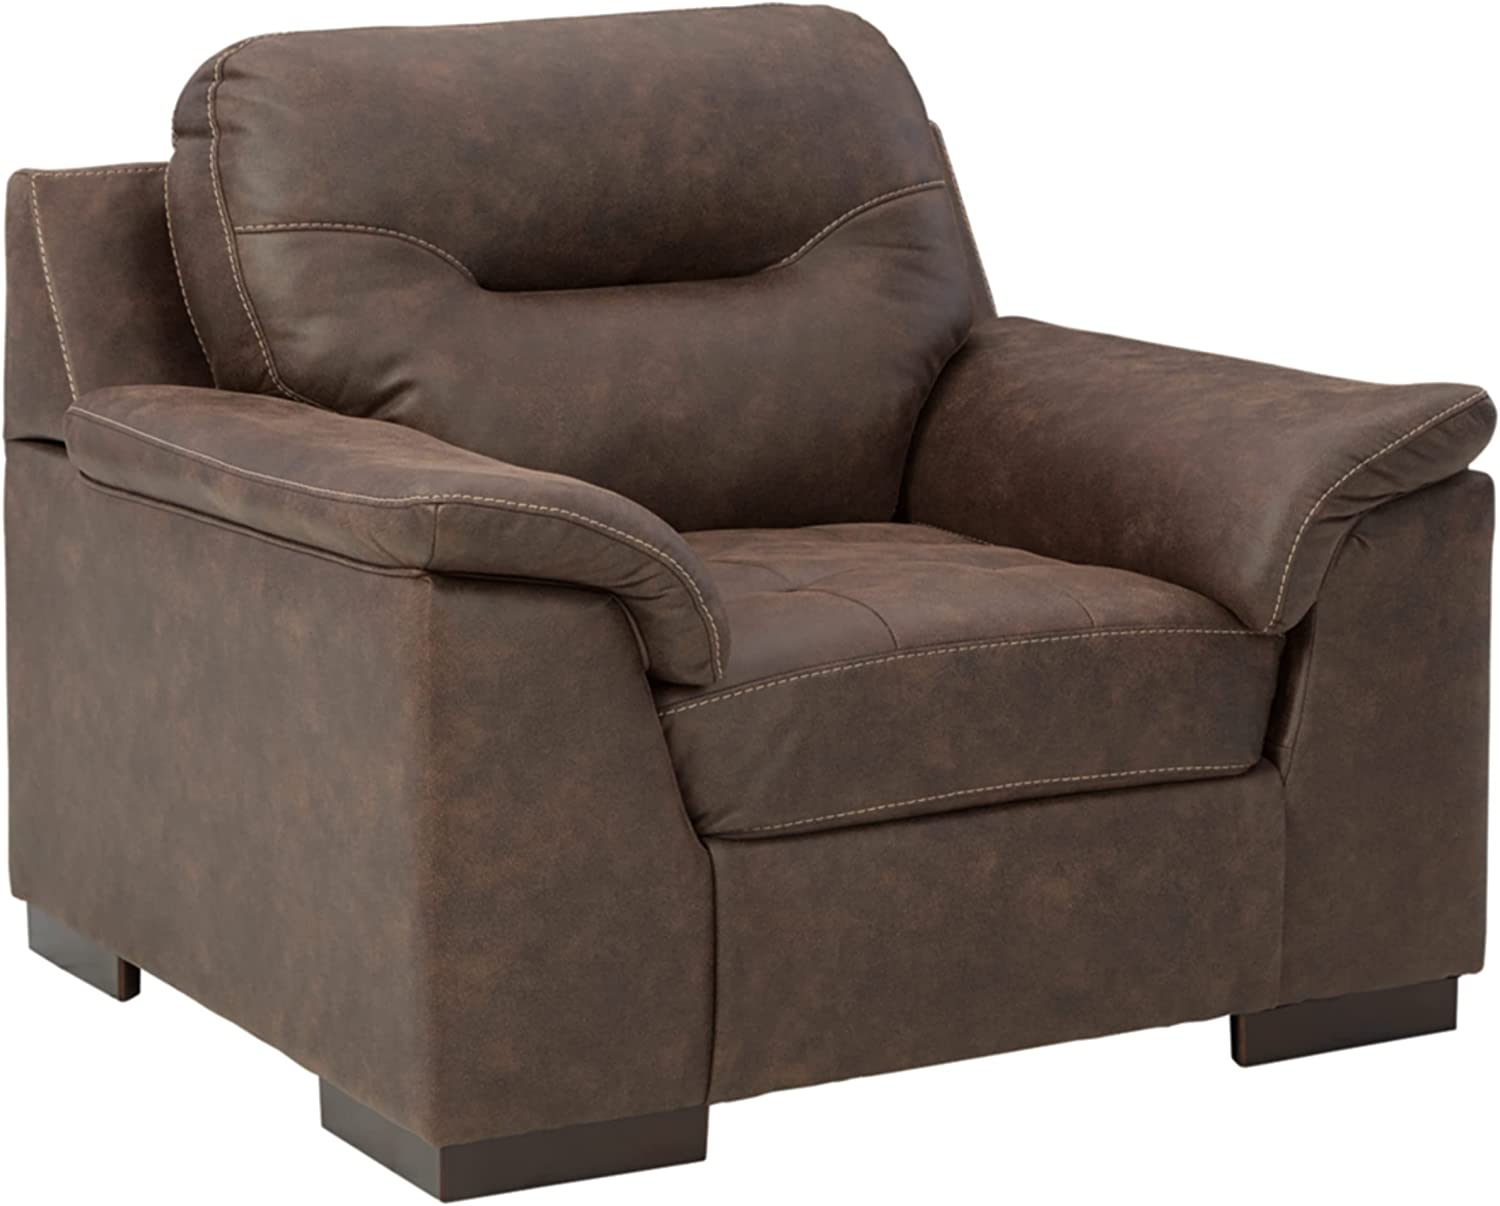 Ashley Maderla Modern Faux Leather Oversized Accent Chair, Walnut Brown-$280